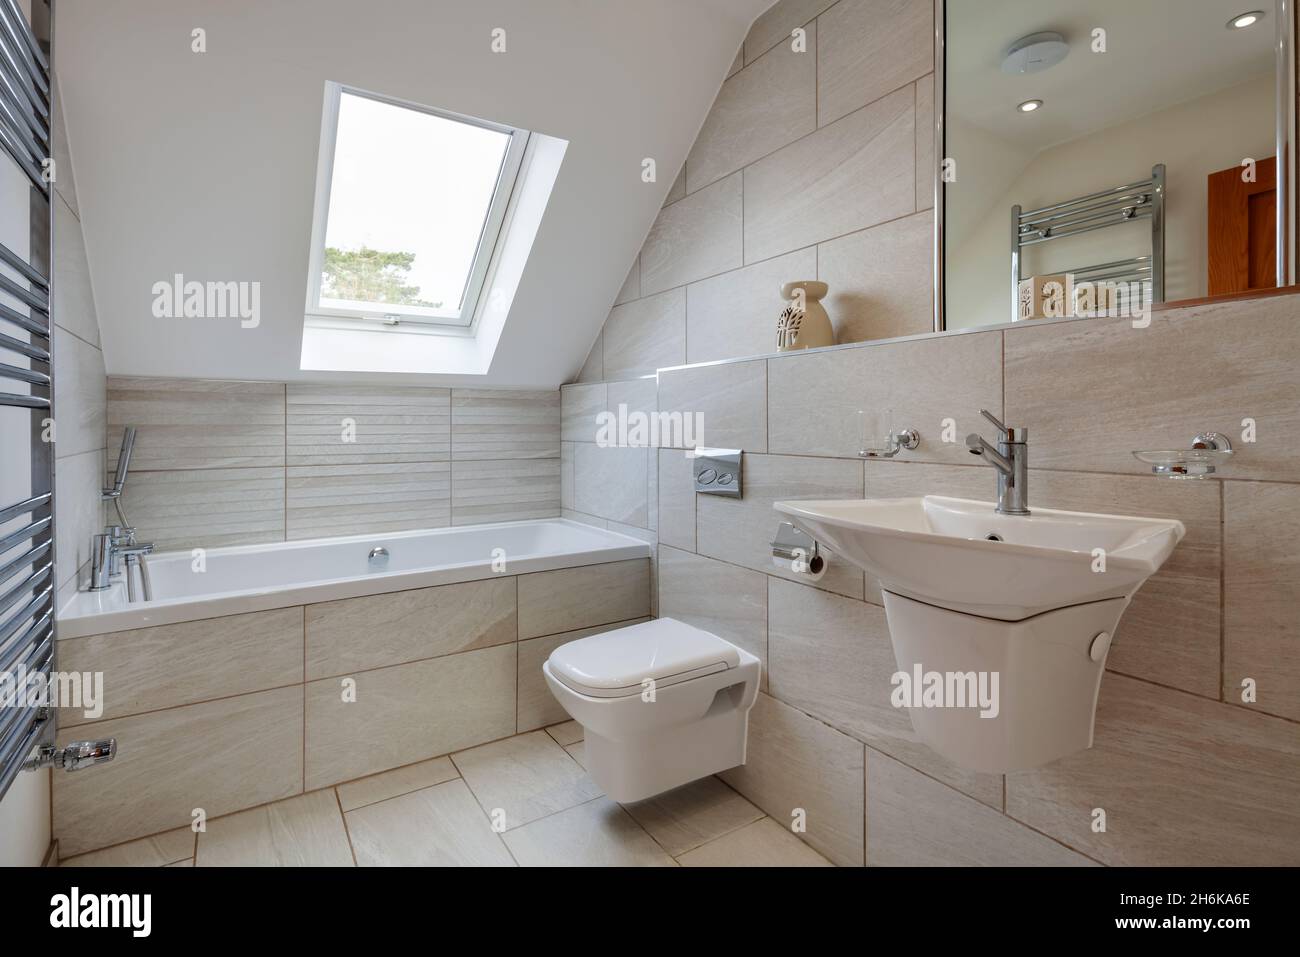 Essex, England - November 18 2019: Contemporary modern tiled bathroom wc with ceramic wall hung sink, towel rail and mirror. Stock Photo